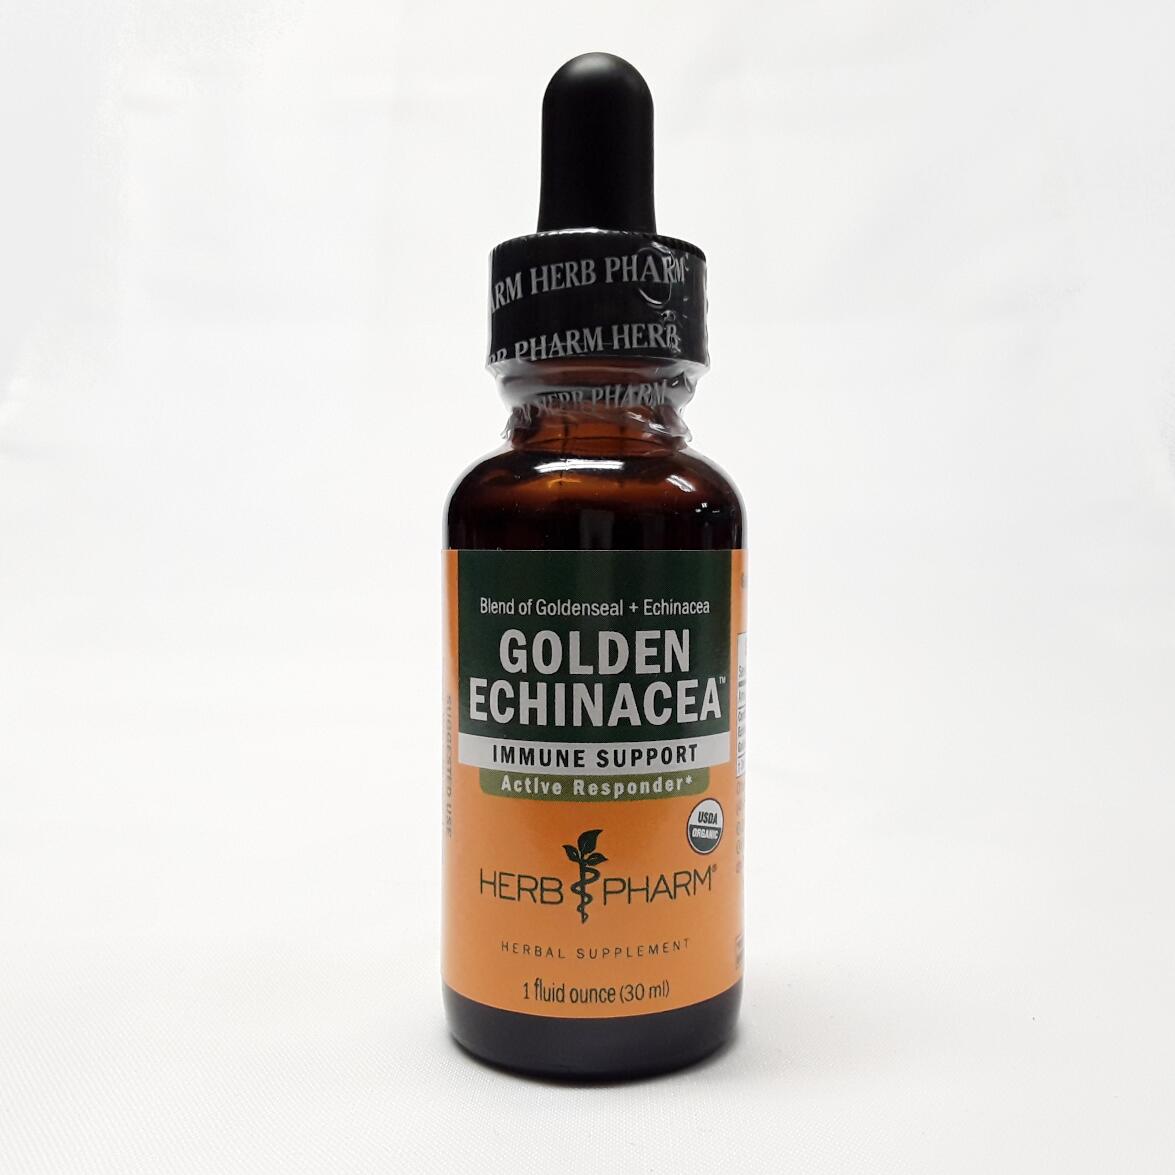 Herbpharm Golden Echinacea Product Image View 1